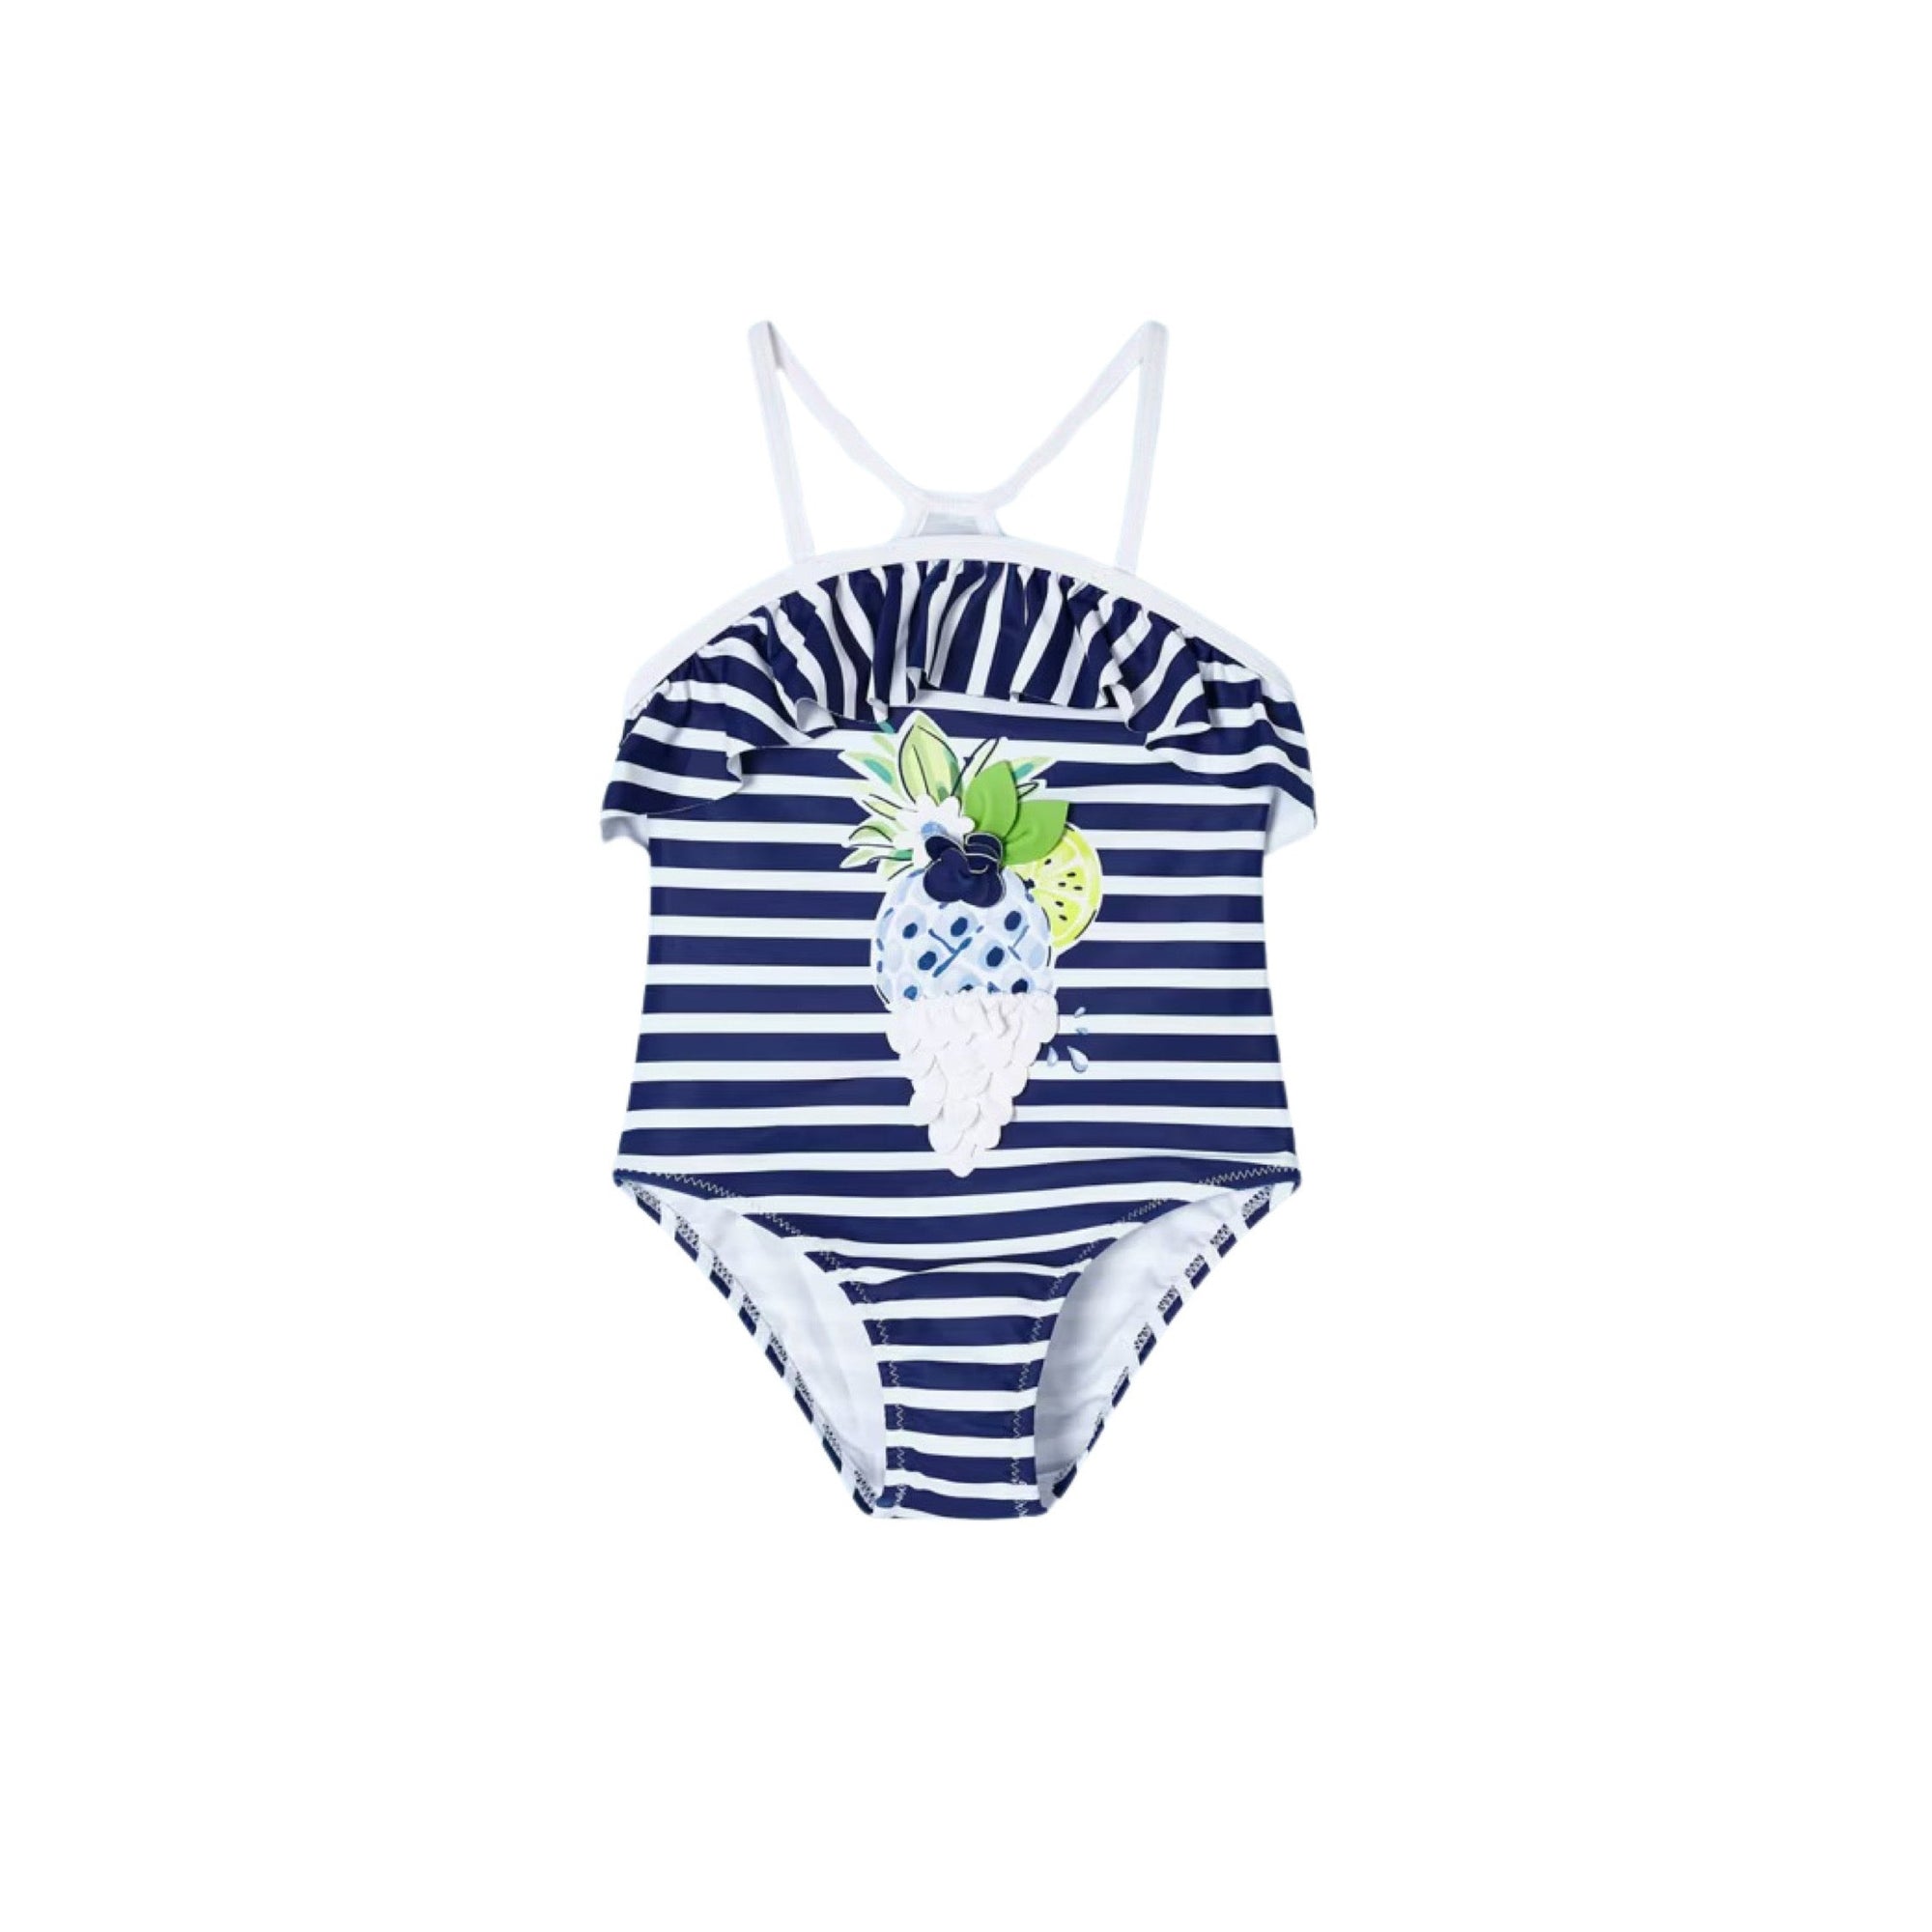 Navy & White Stripe with Pineapple Motif Swimsuit